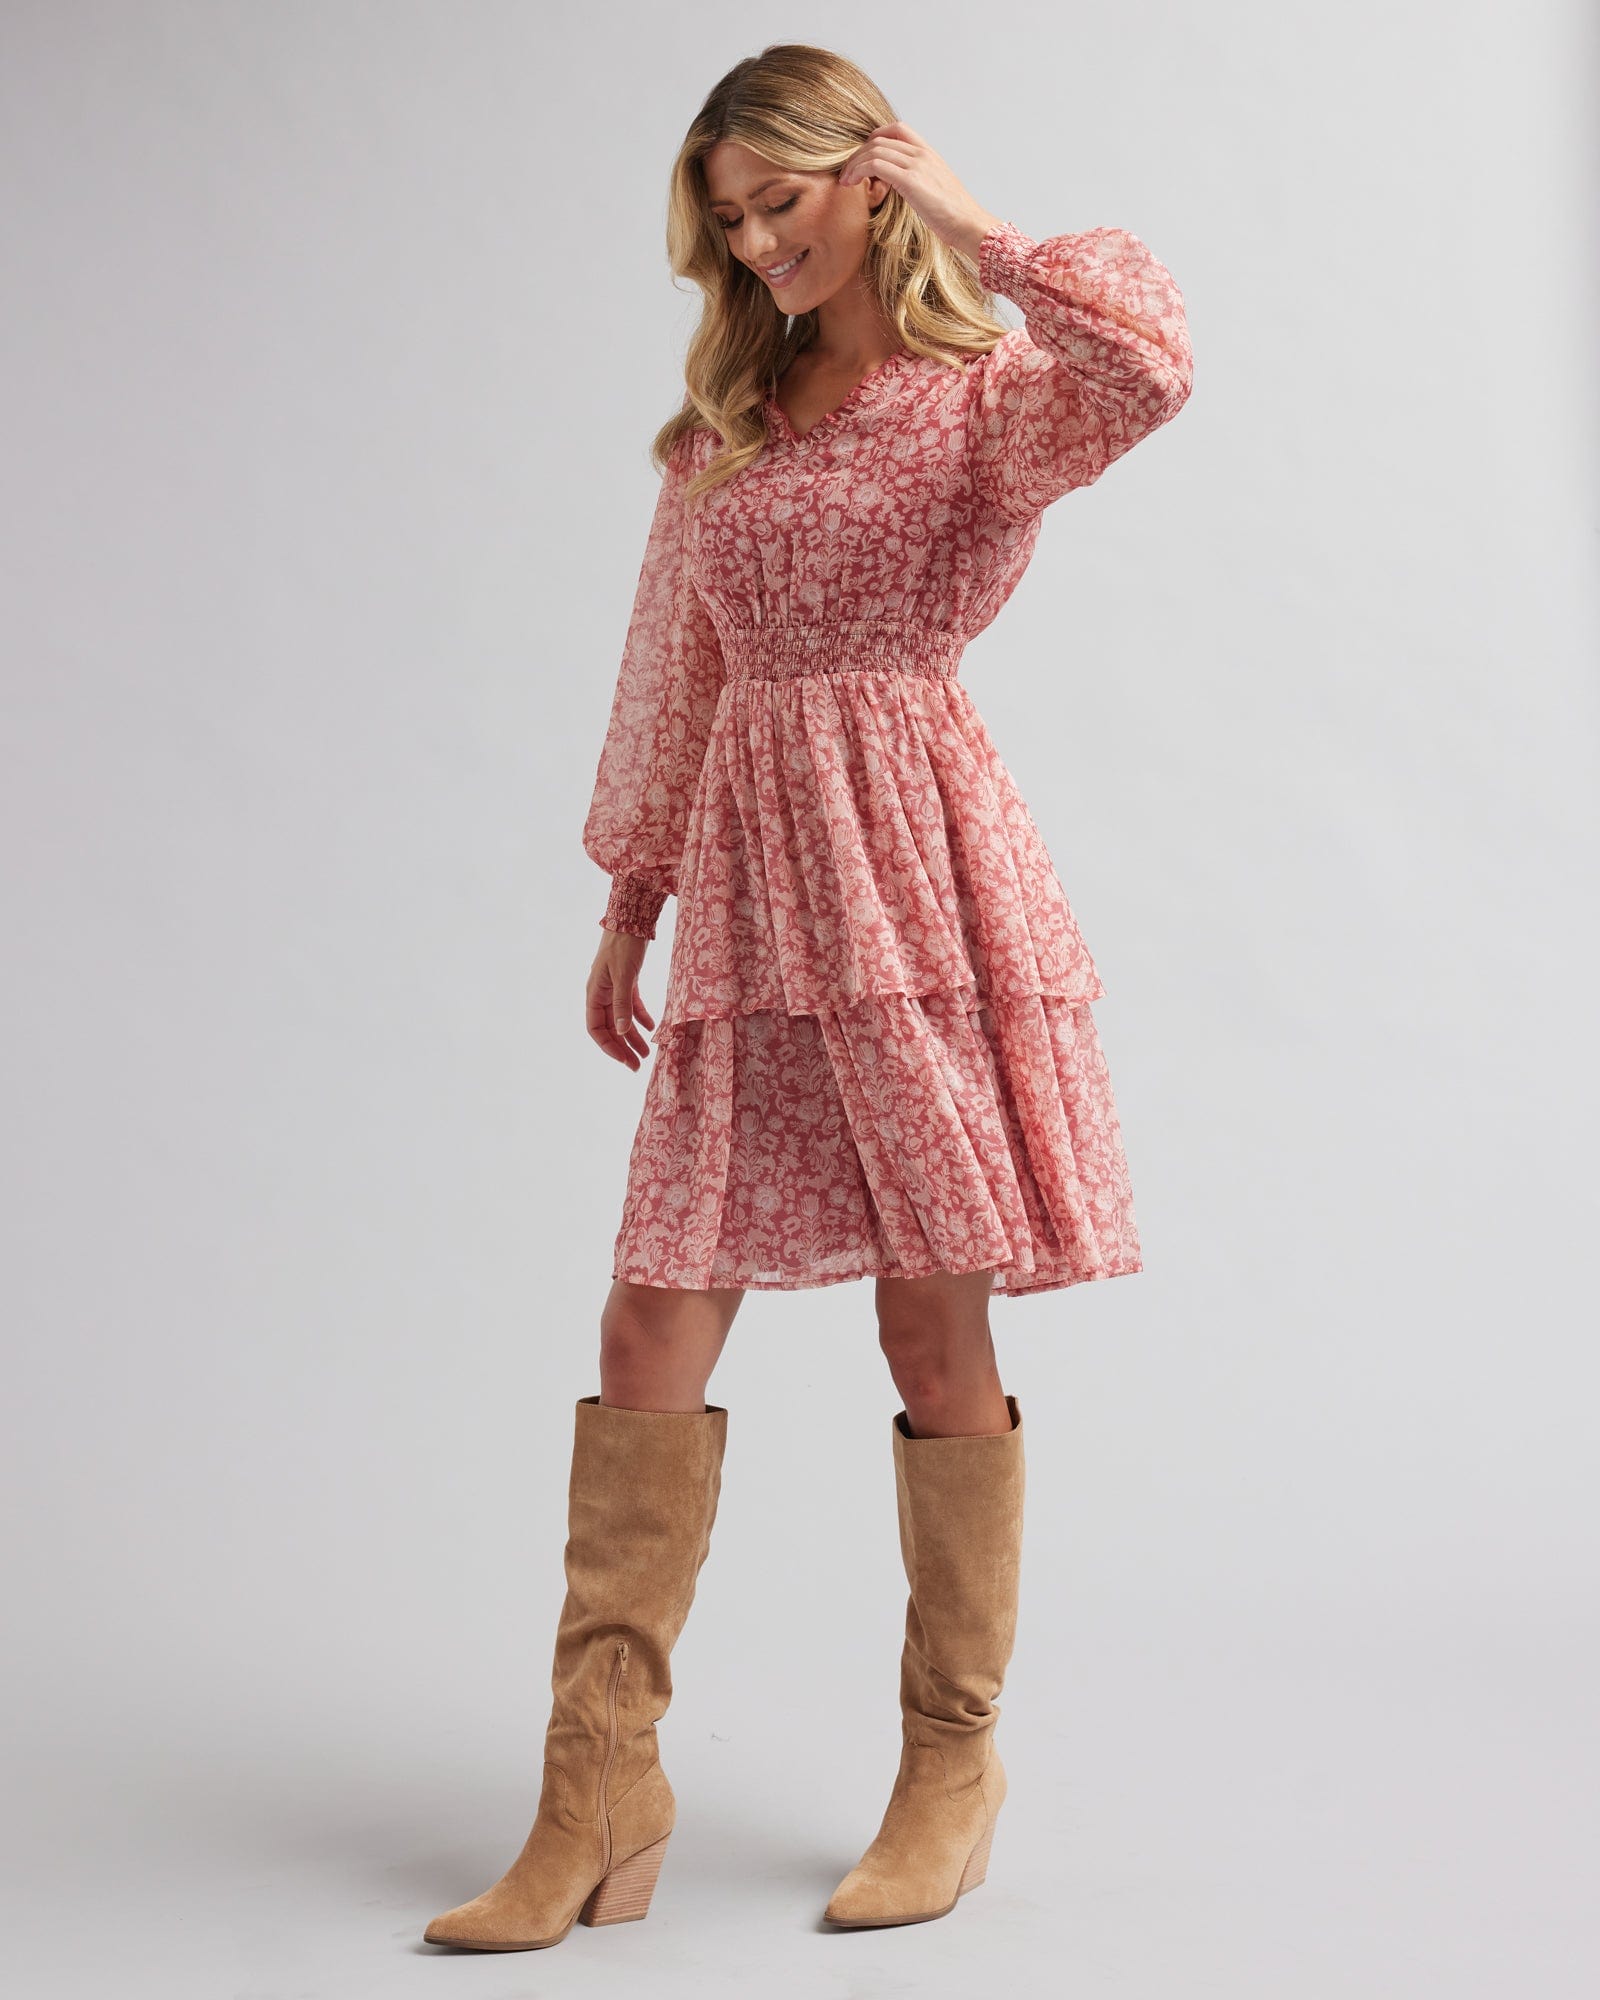 Woman in a long sleeve, knee-length, pink floral printed dress